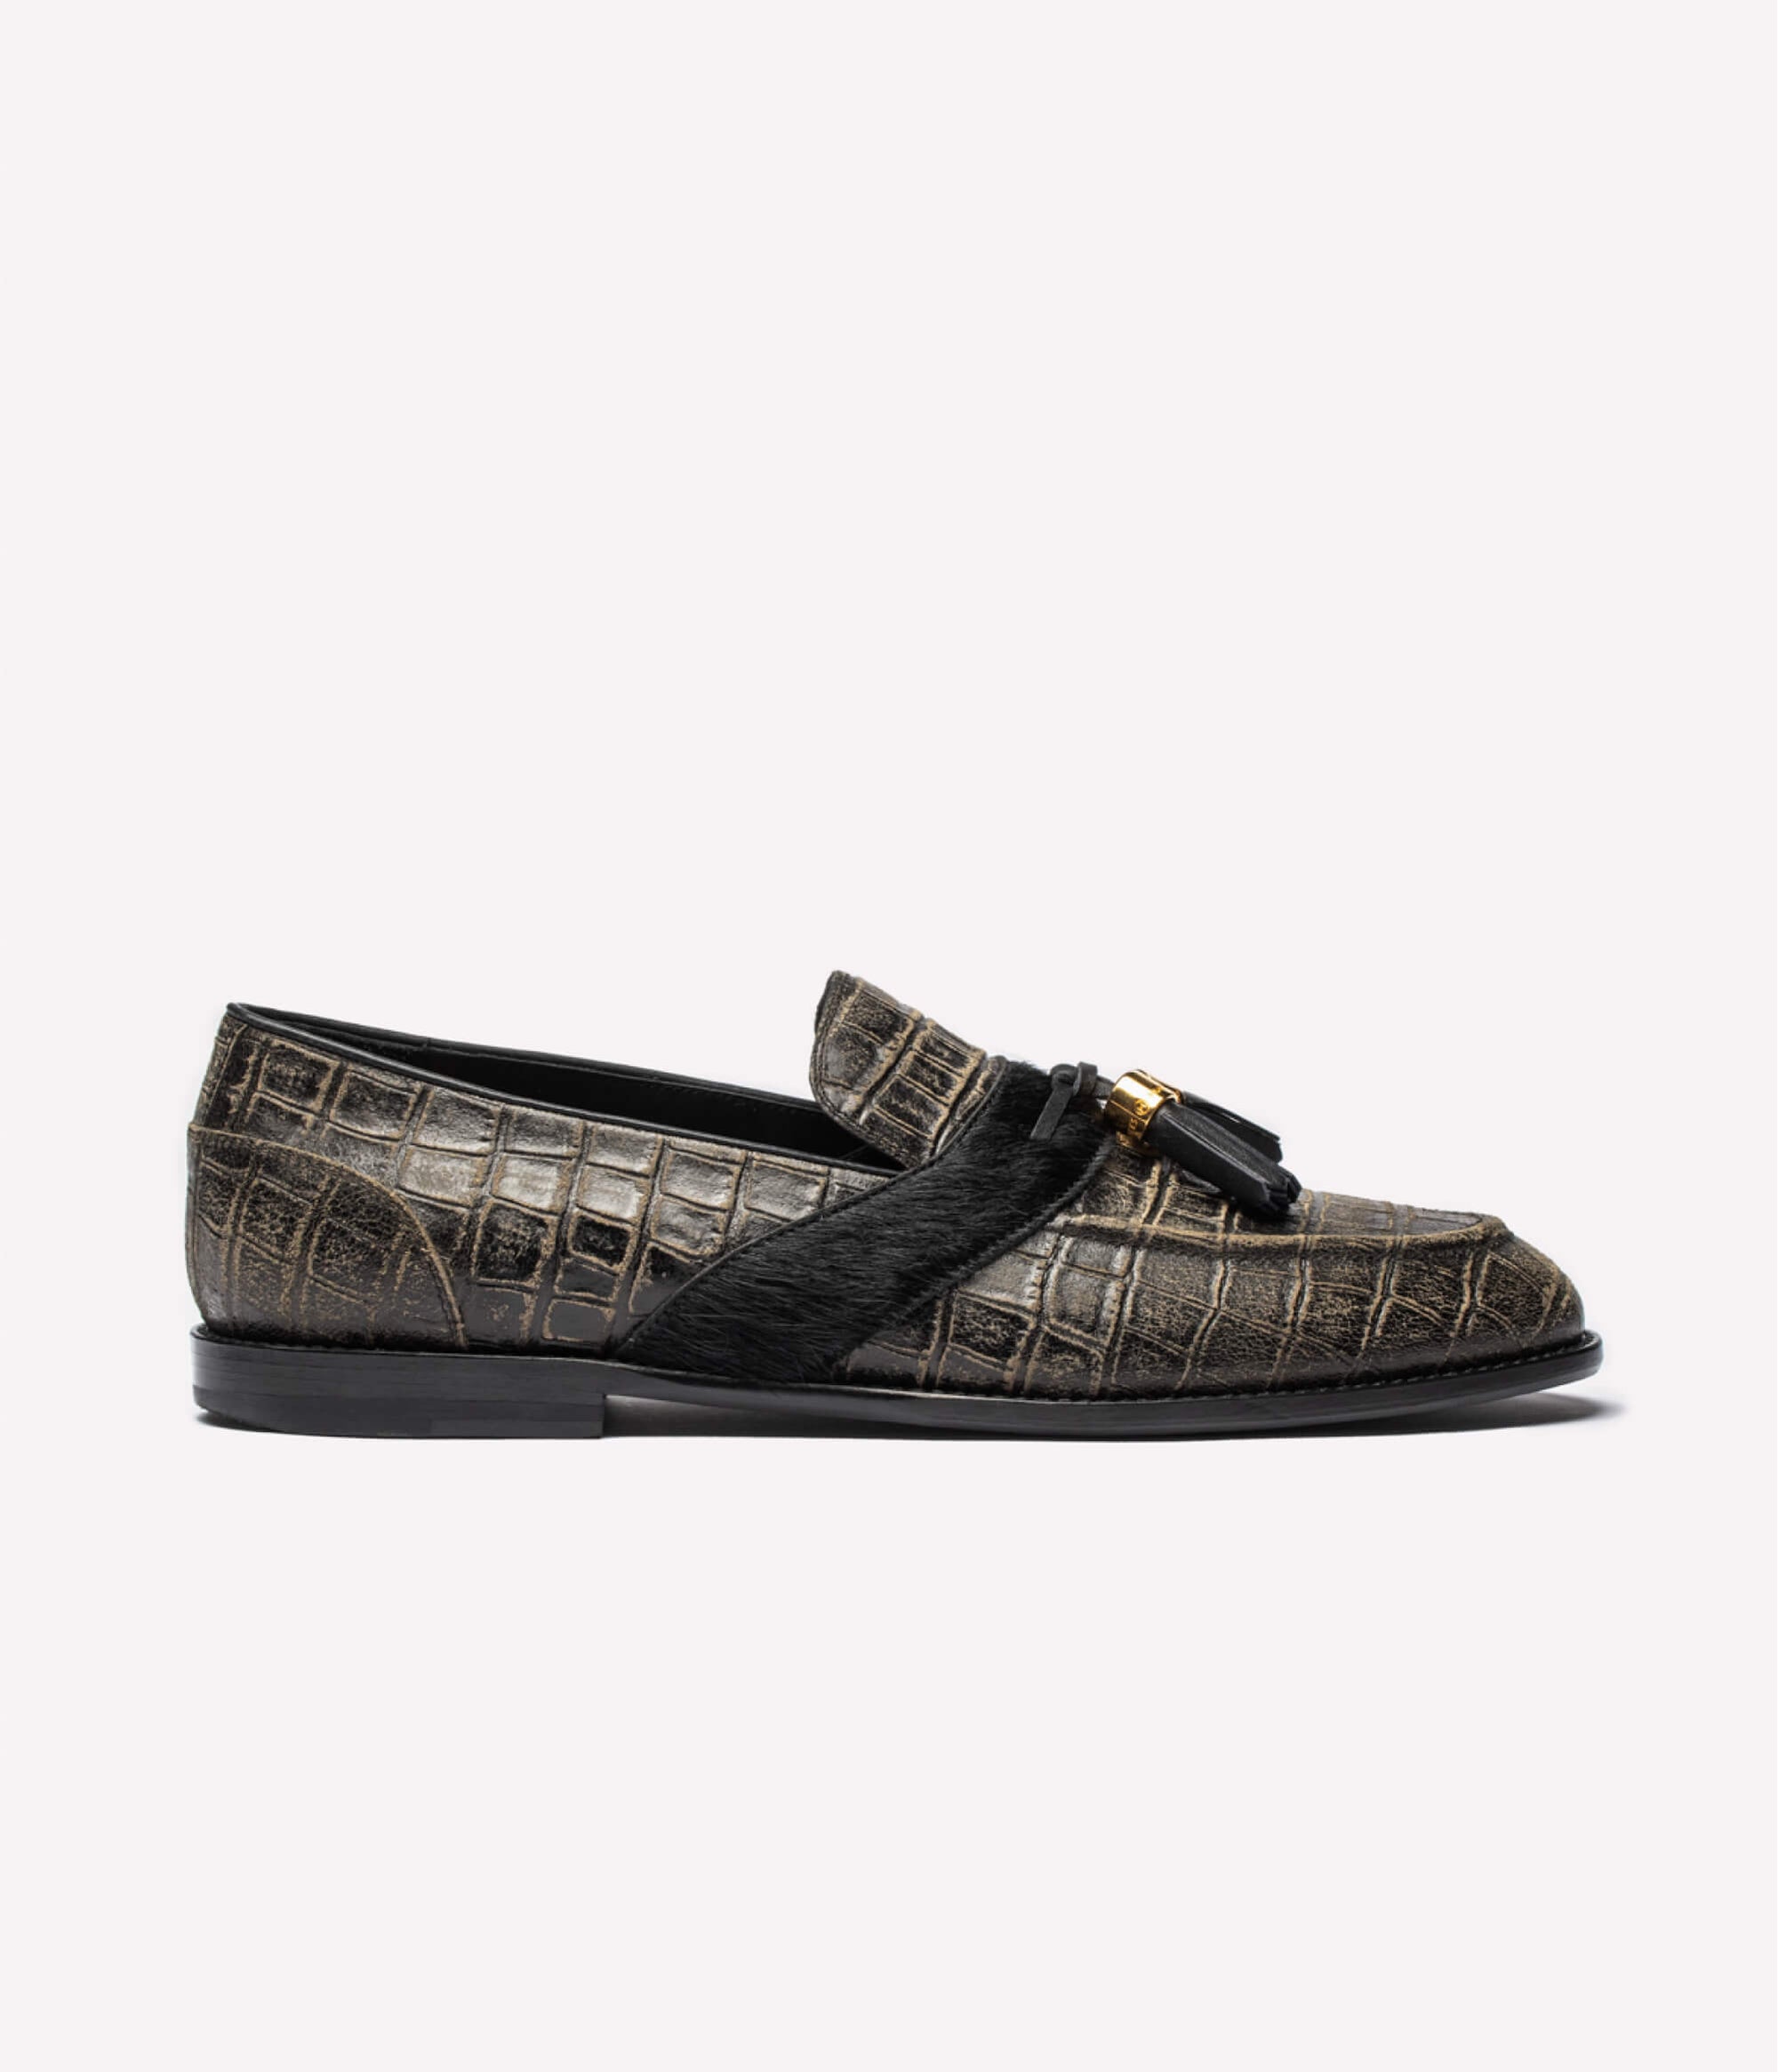 HUMAN RECREATIONAL SERVICES DEL REY TASSEL LOAFER IN CROCODILE-TEXTURED LEATHER